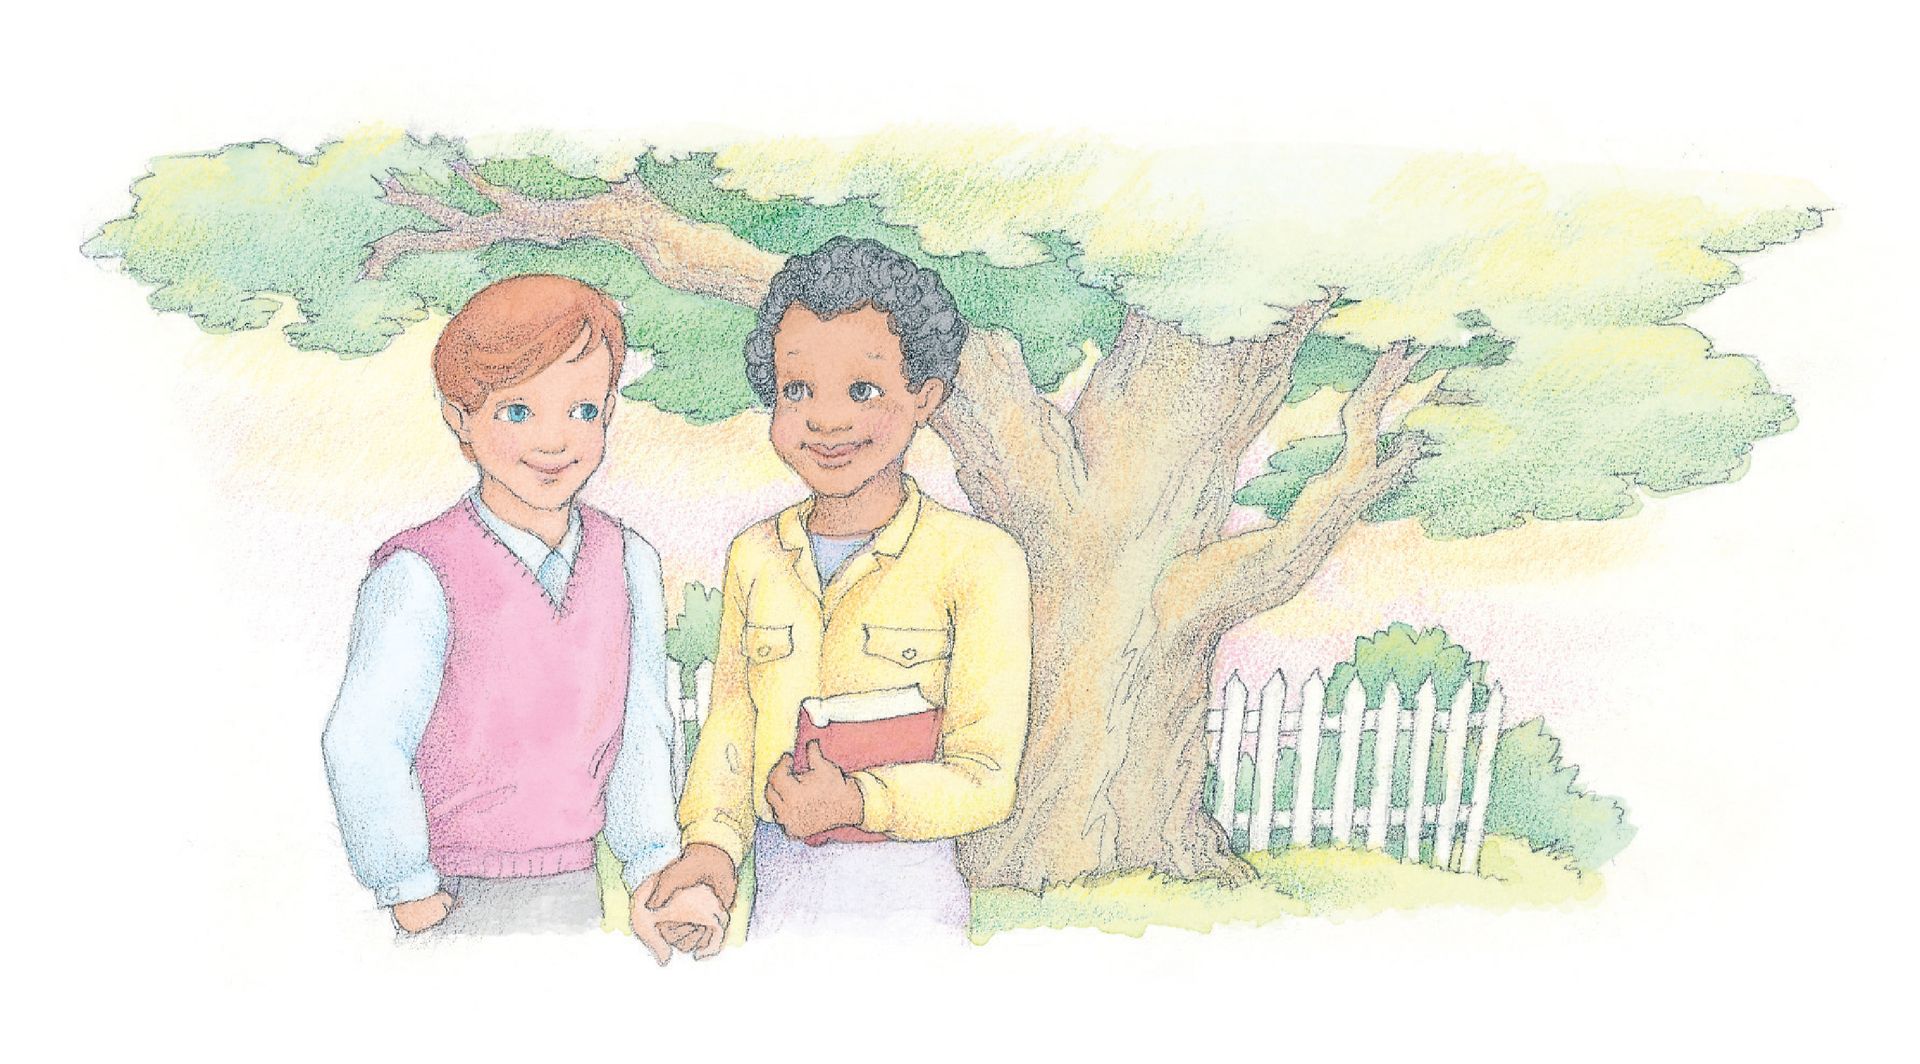 Two friends holding hands and smiling. From the Children’s Songbook, page 146, “Keep the Commandments”; watercolor illustration by Phyllis Luch.